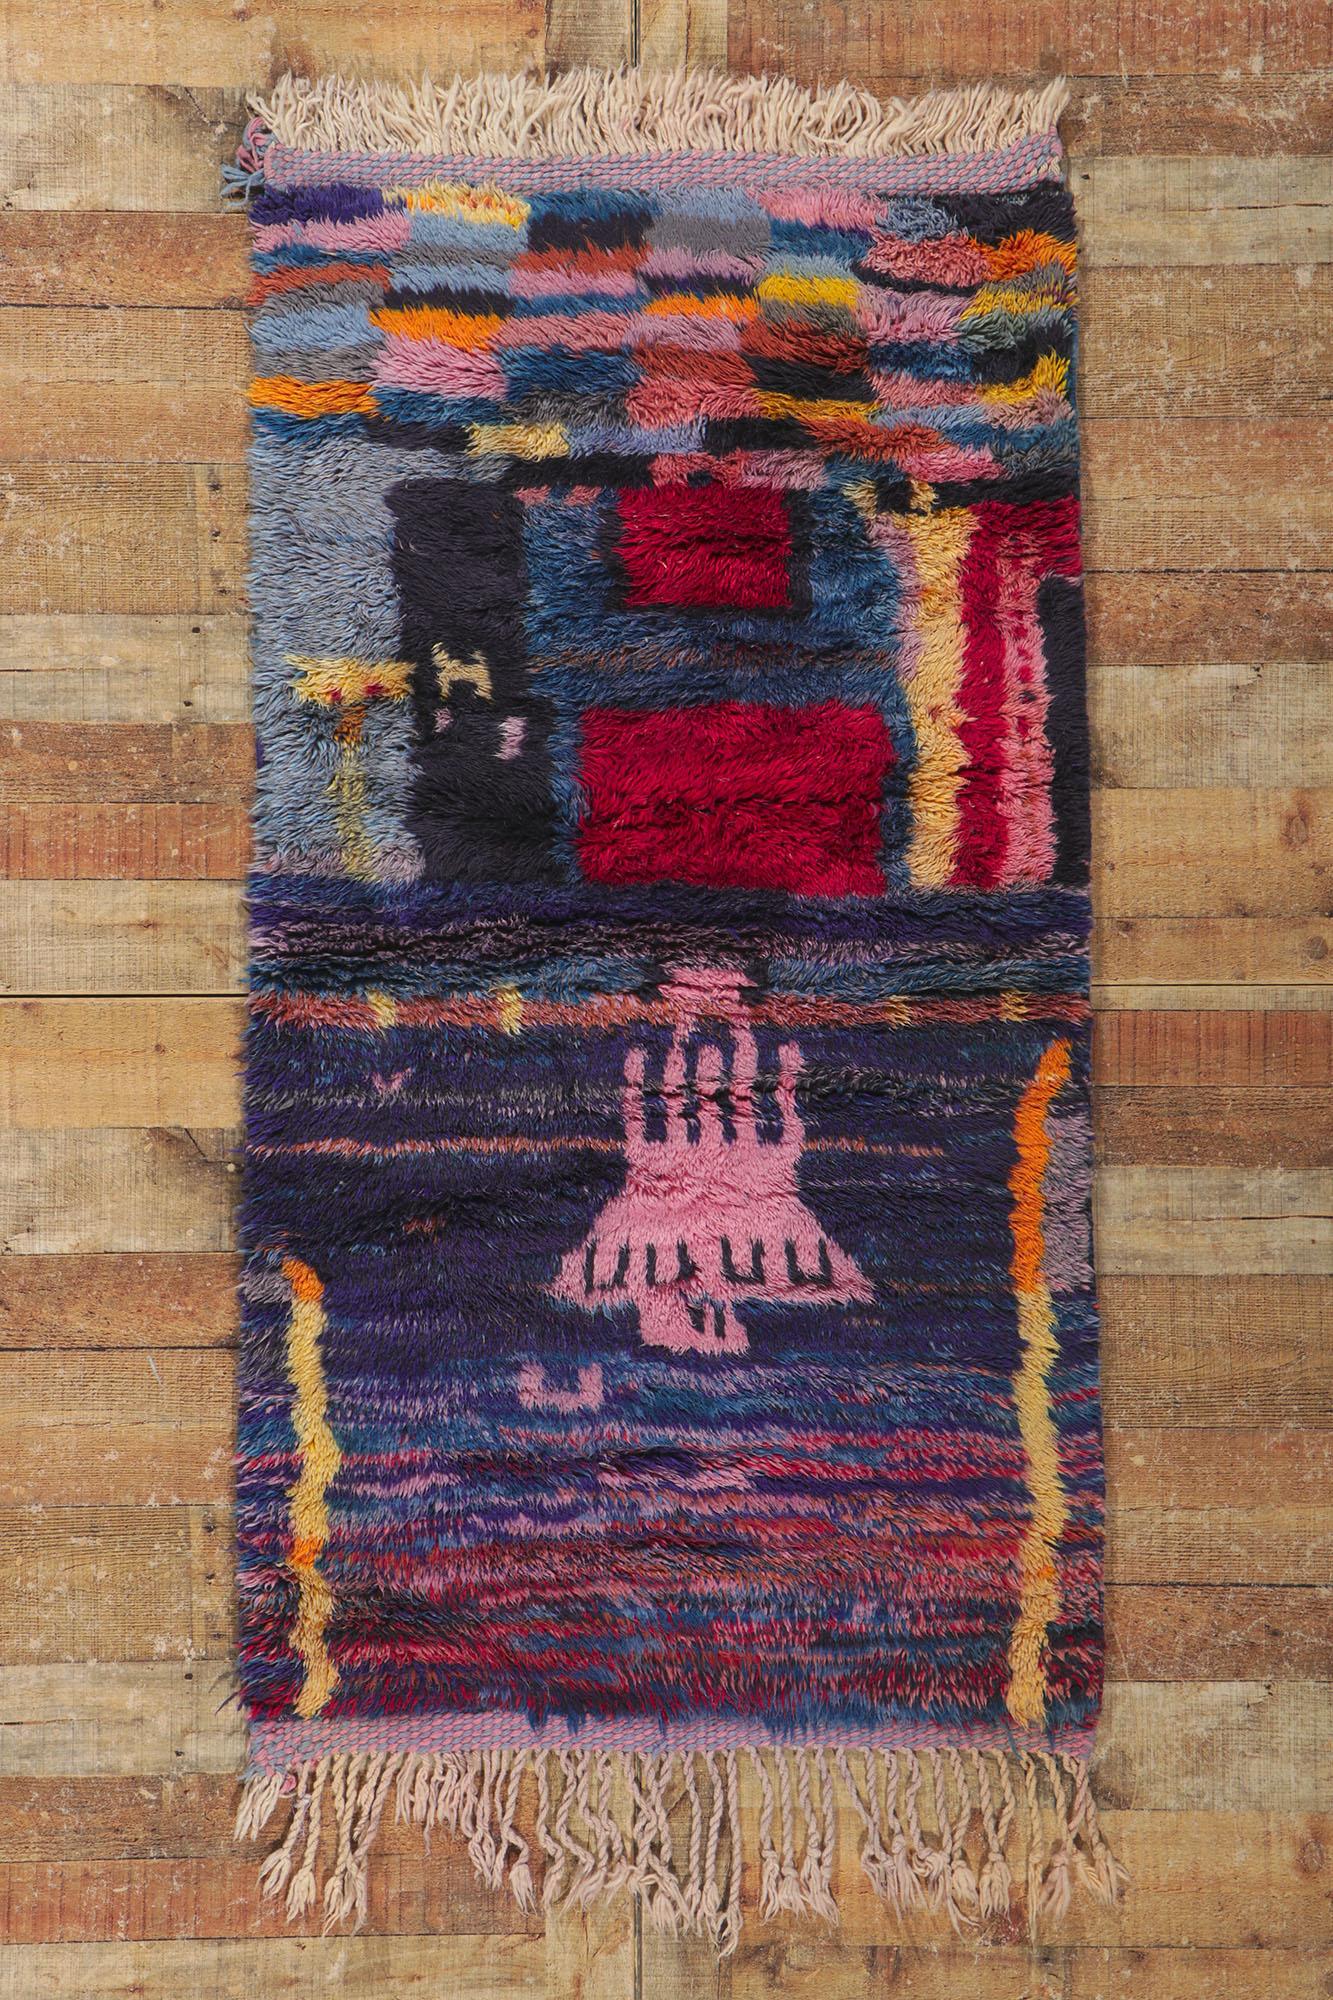 Contemporary Colorful Beni Ourain Moroccan Rug by Berber Tribes of Morocco For Sale 2